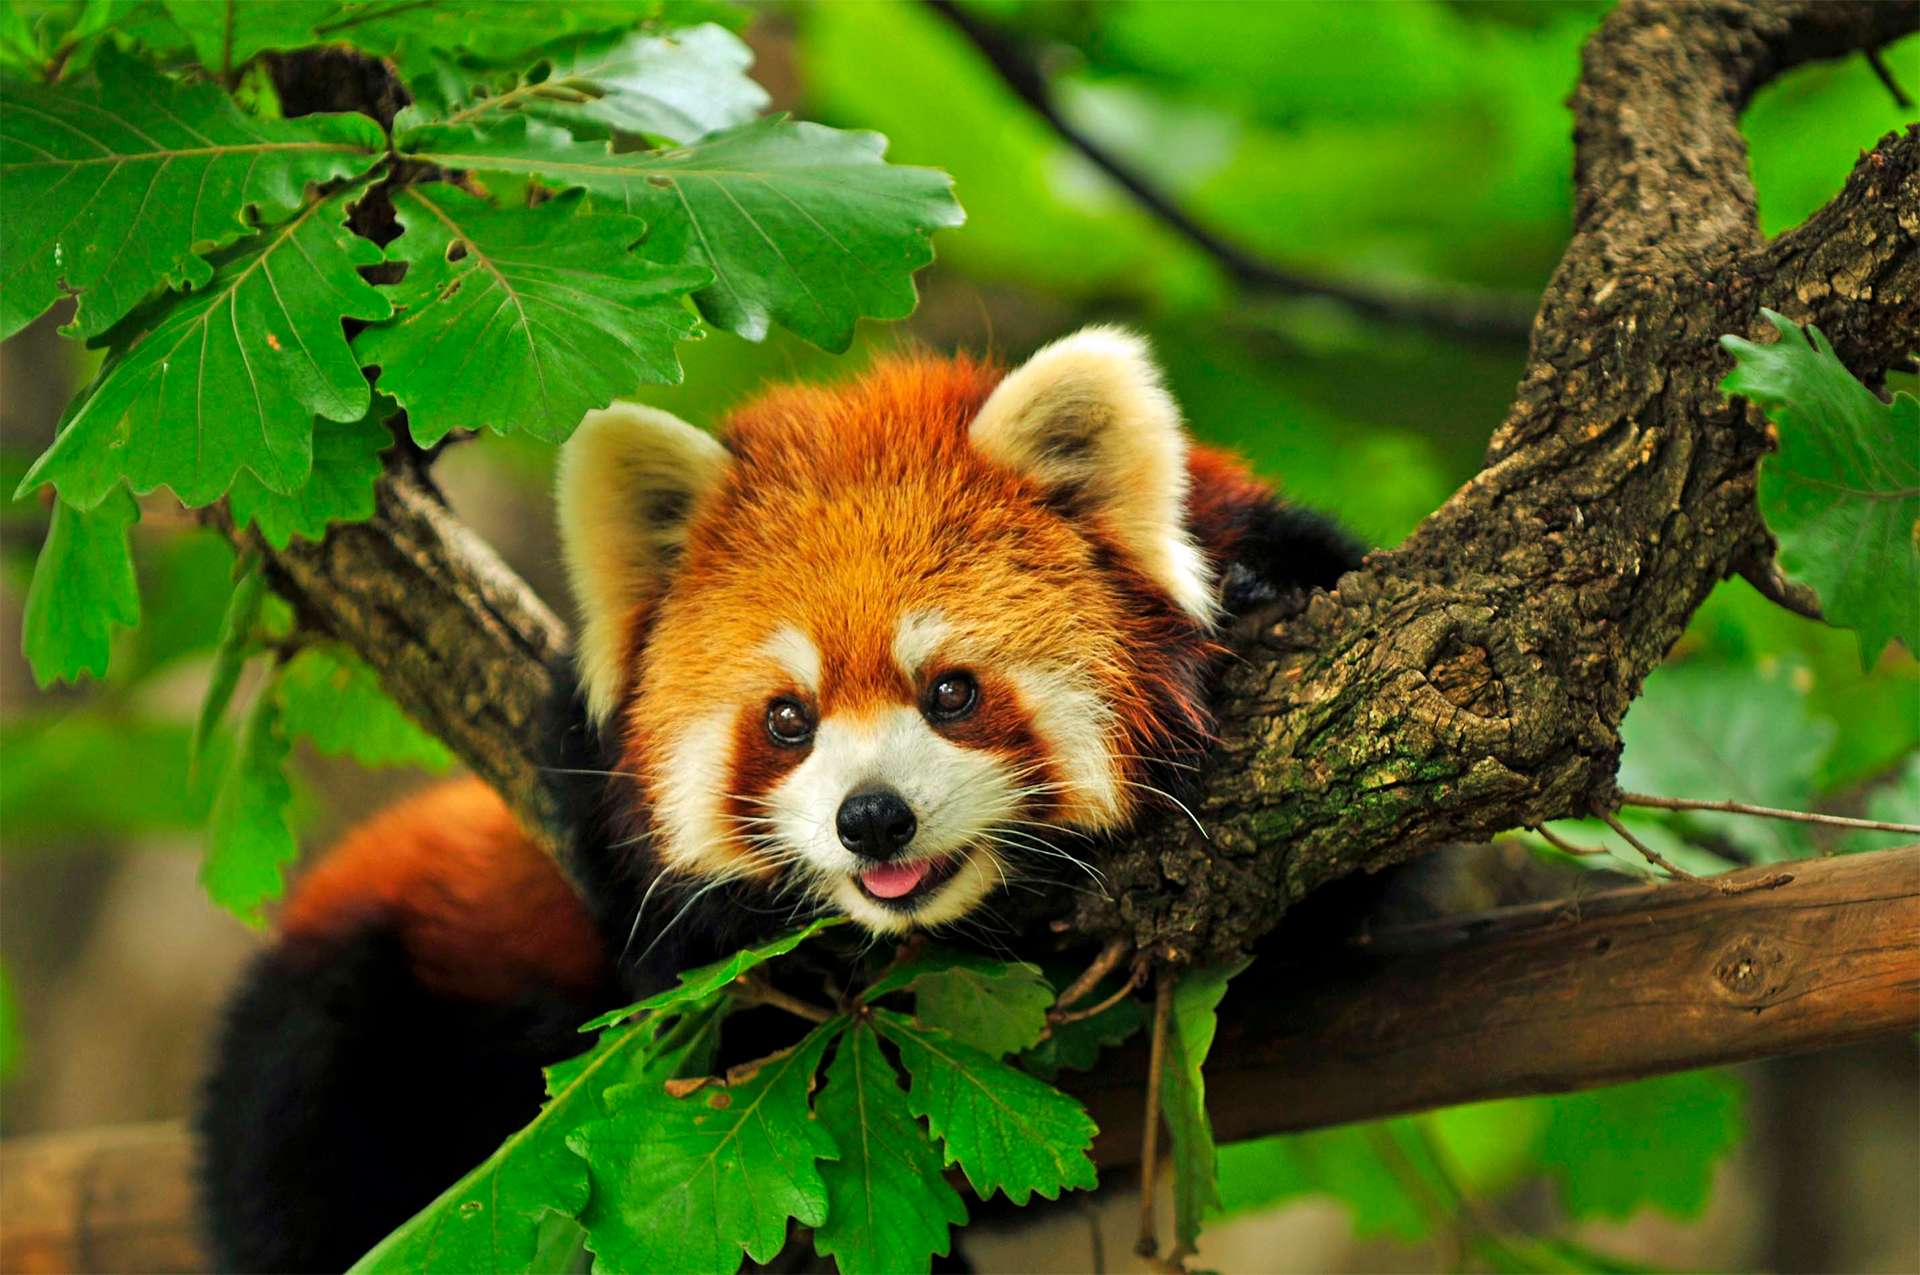 Red panda climbs a tree Silly face with tongue sticking out